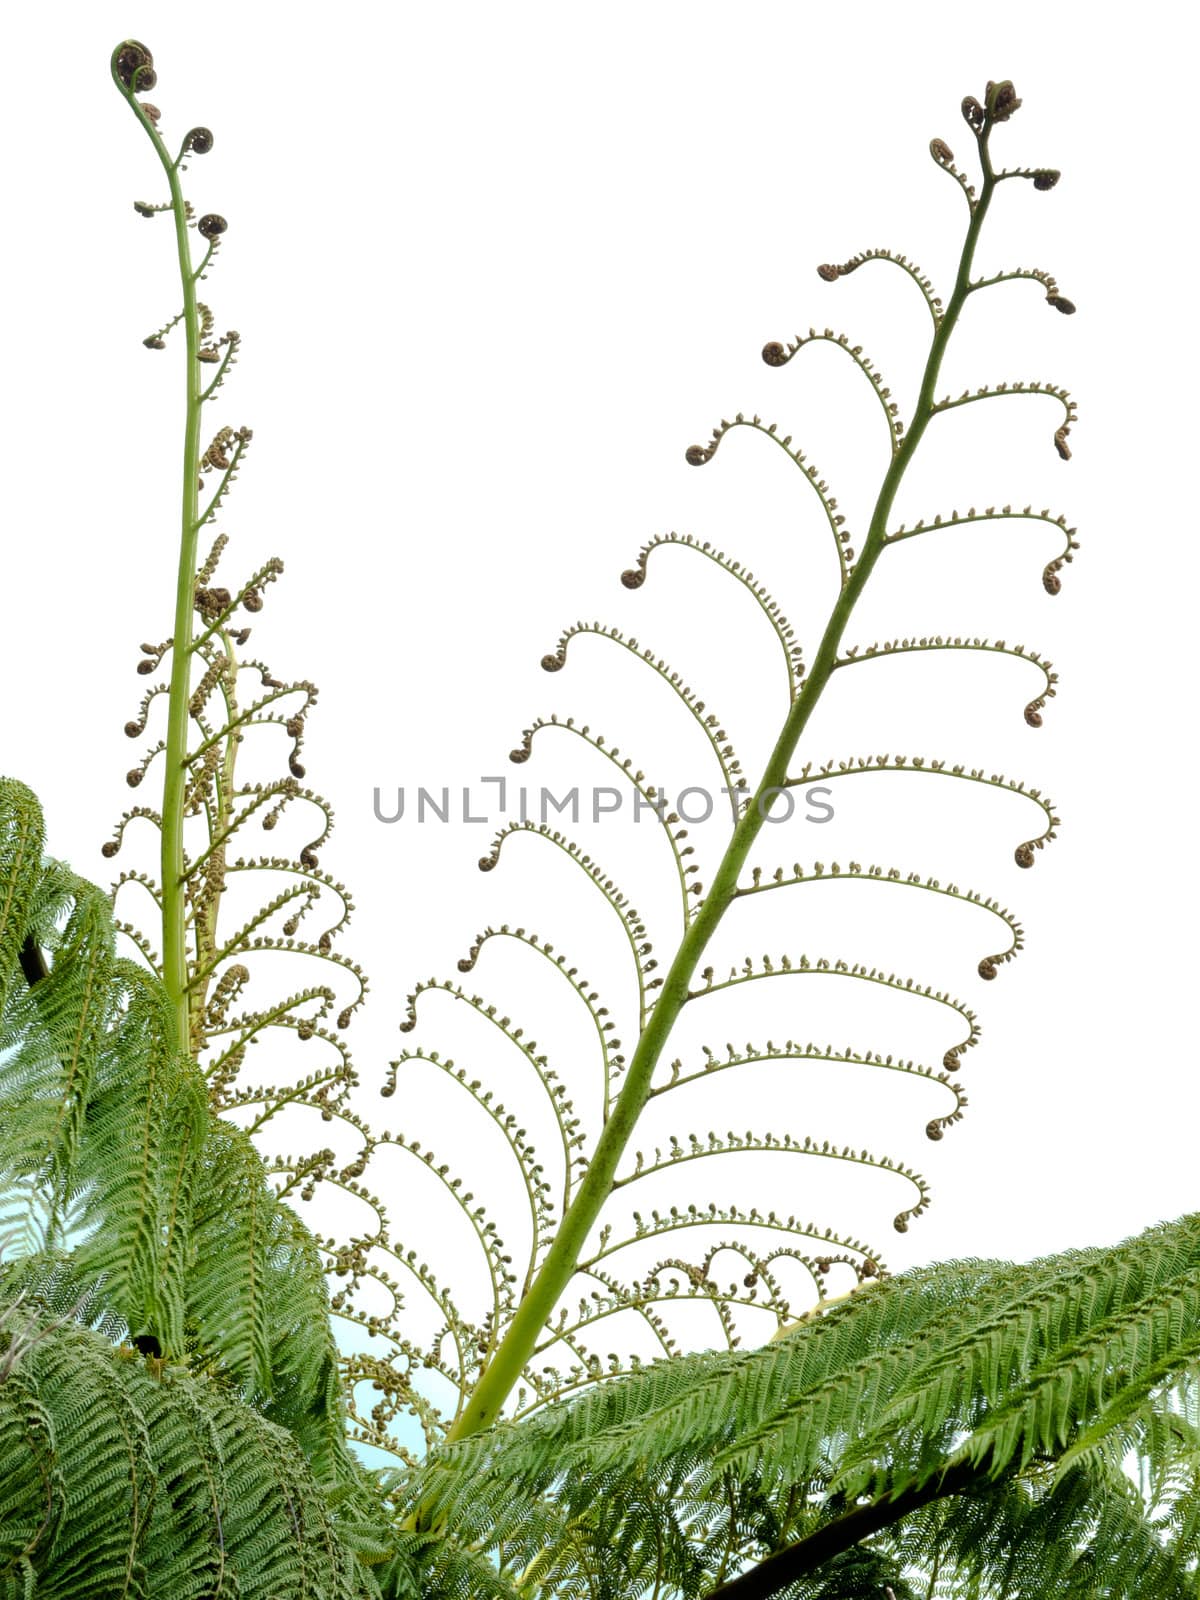 Young spring fronds of silver tree fern or ponga, Cyathea dealbata, unfurling to show the wonderful delicate yet intricate patterns of nature isolated on white